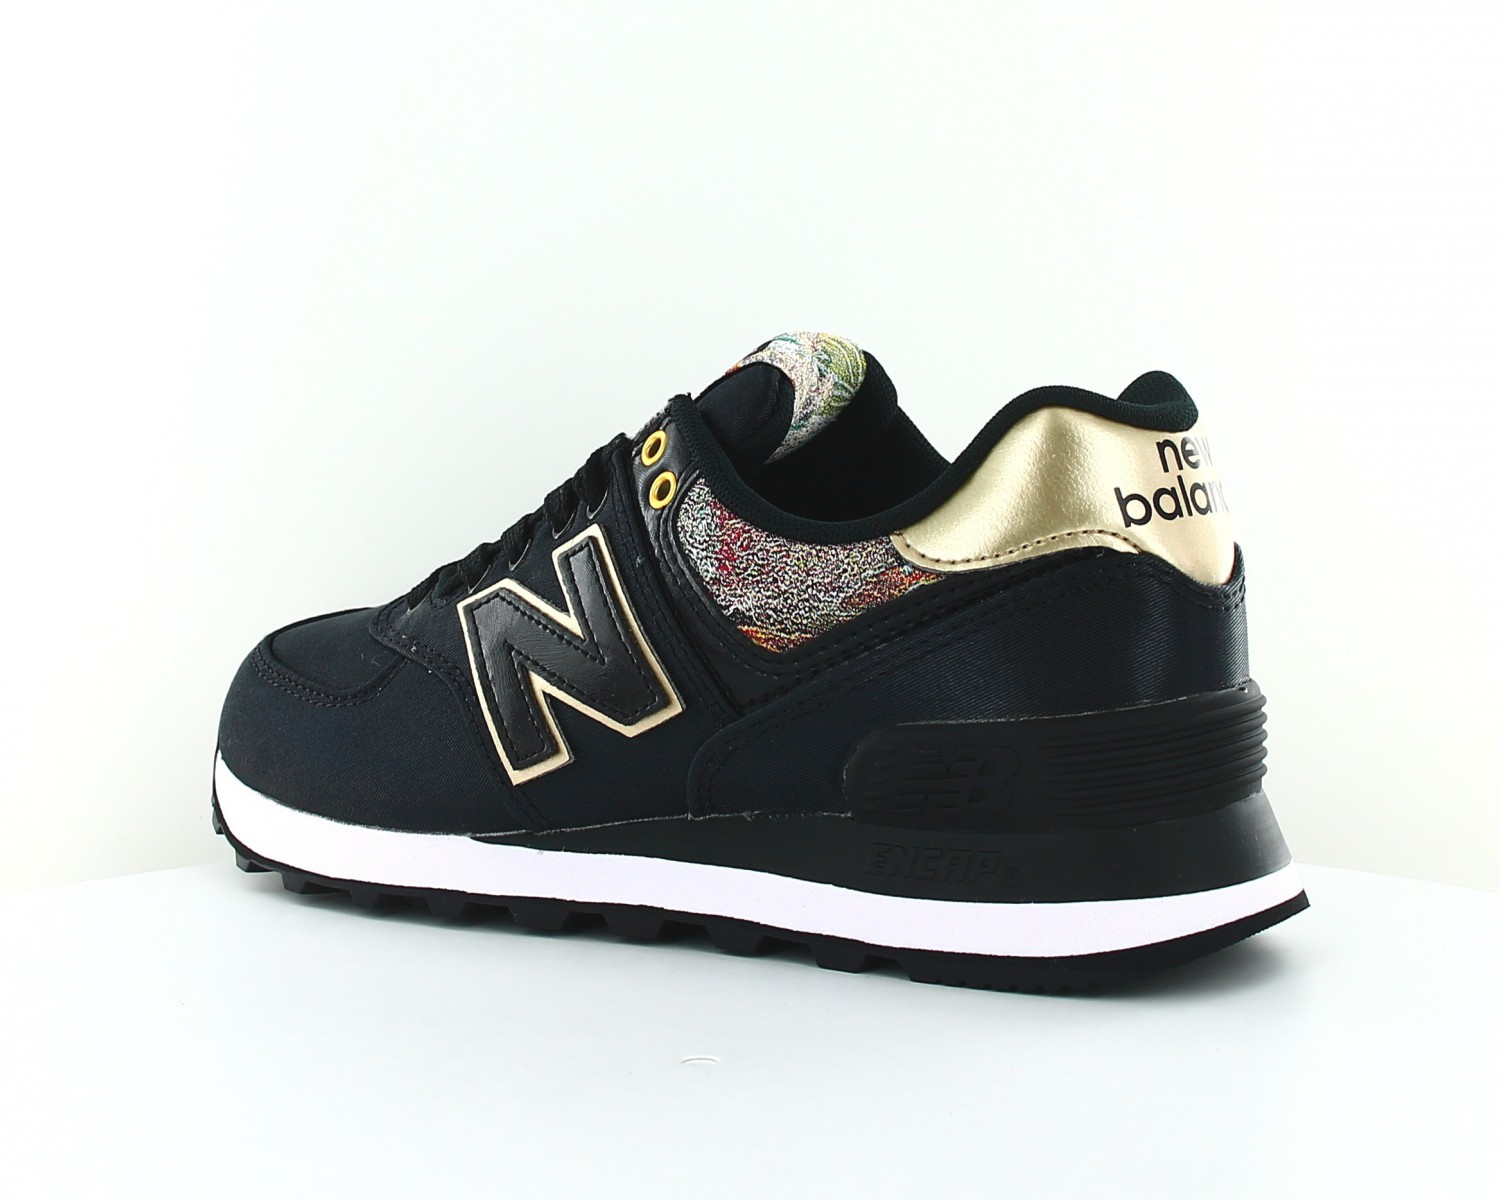 new balance basket femme, OFF 78%,where to buy!